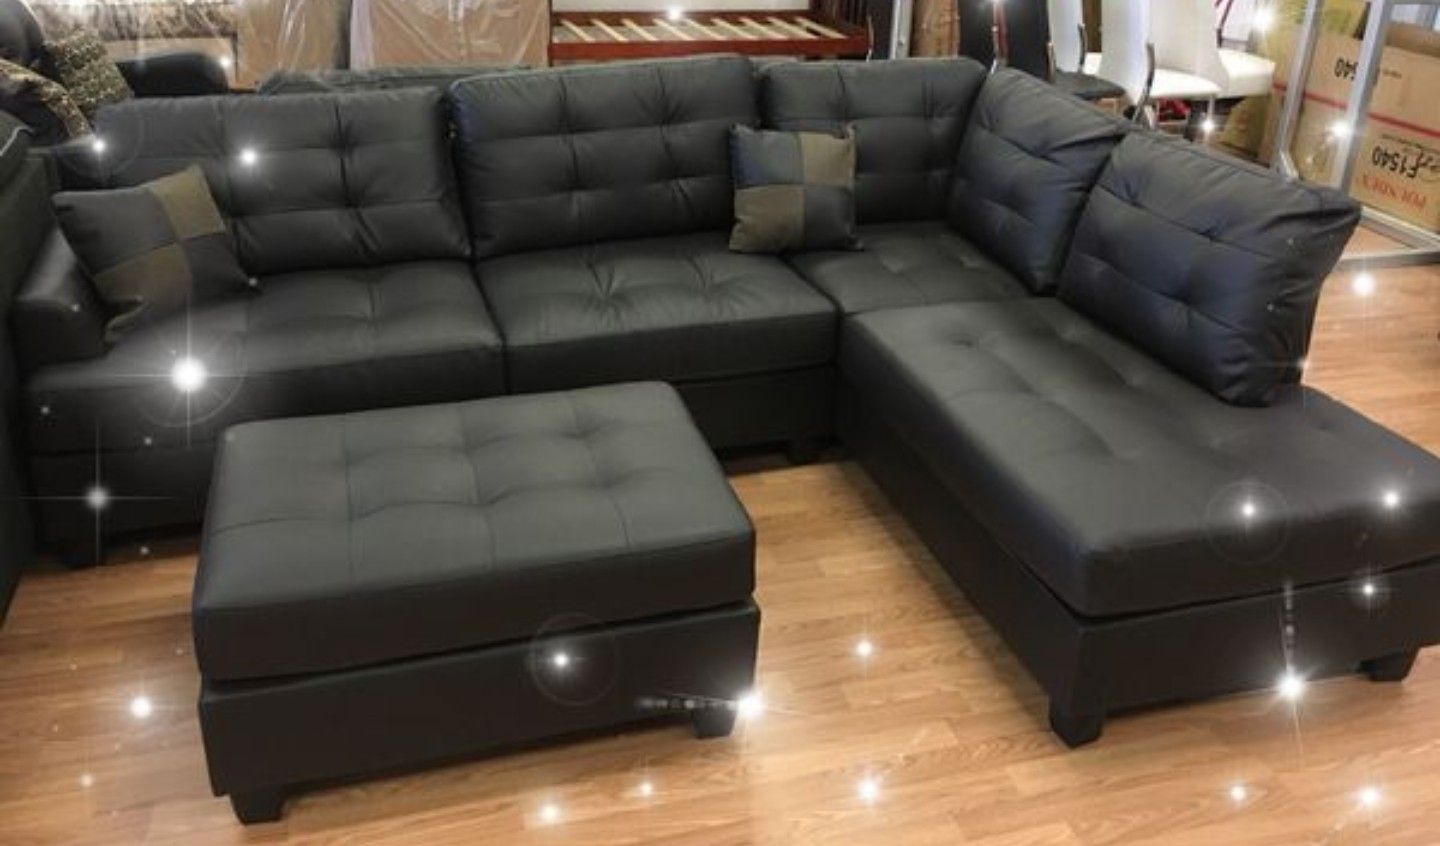 Brand New Brown Faux Leather Sectional Sofa +Ottoman (New In Box) 